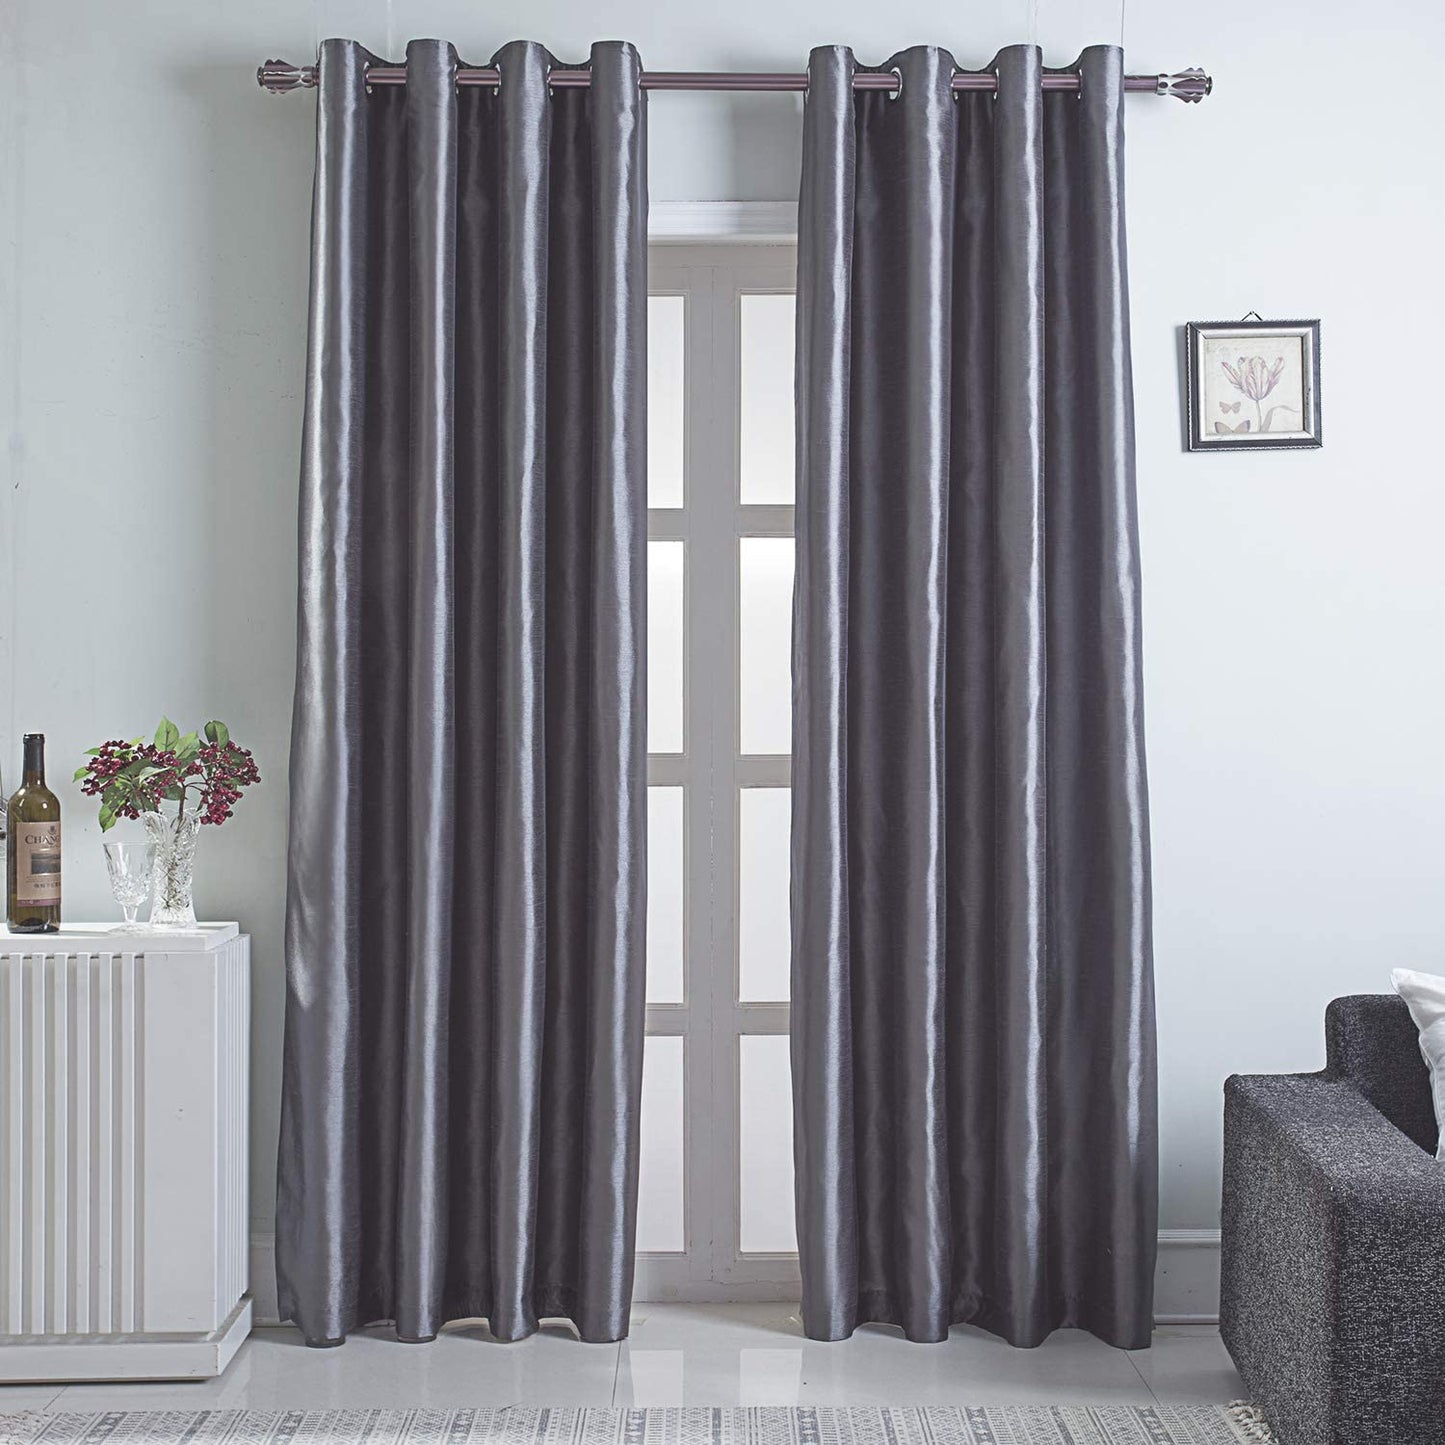 Grey Faux Silk Blackout Curtains,Fully Lined Solid Color Window Treatment Drapes